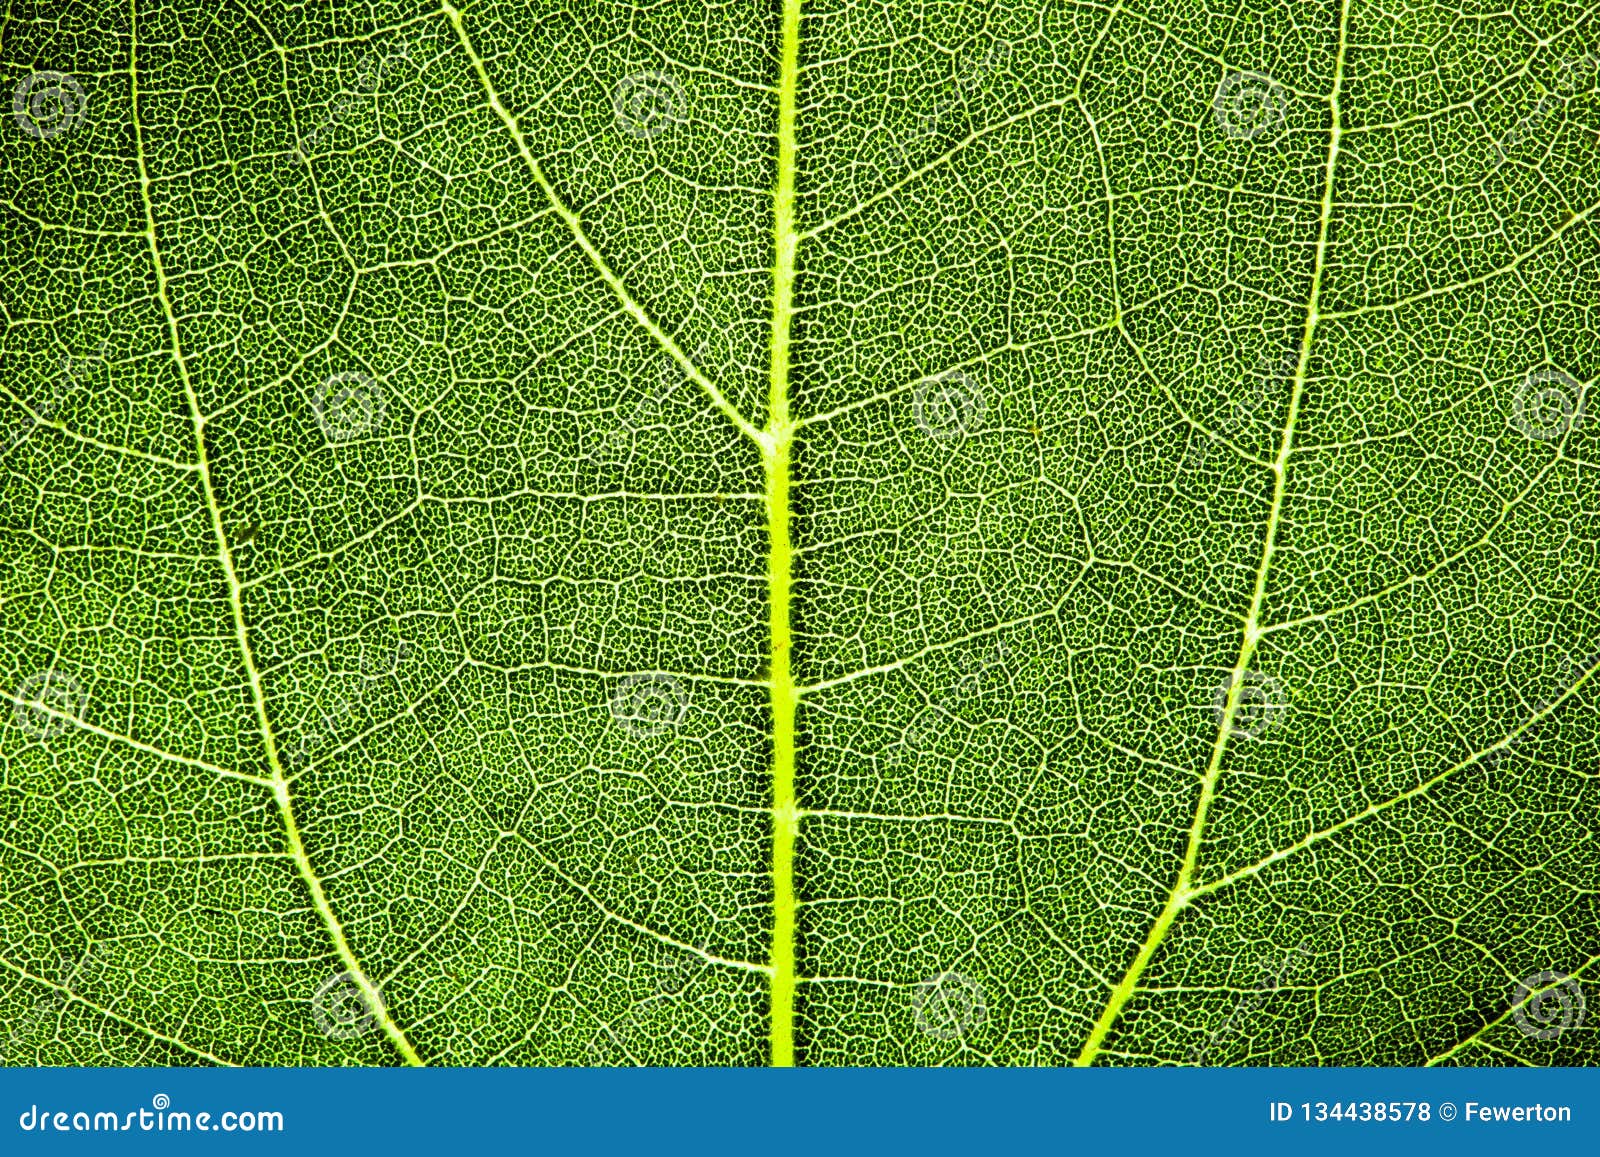 green leaf fresh detailed rugged surface structure extreme macro closeup photo with midrib, leaf veins and grooves texture.